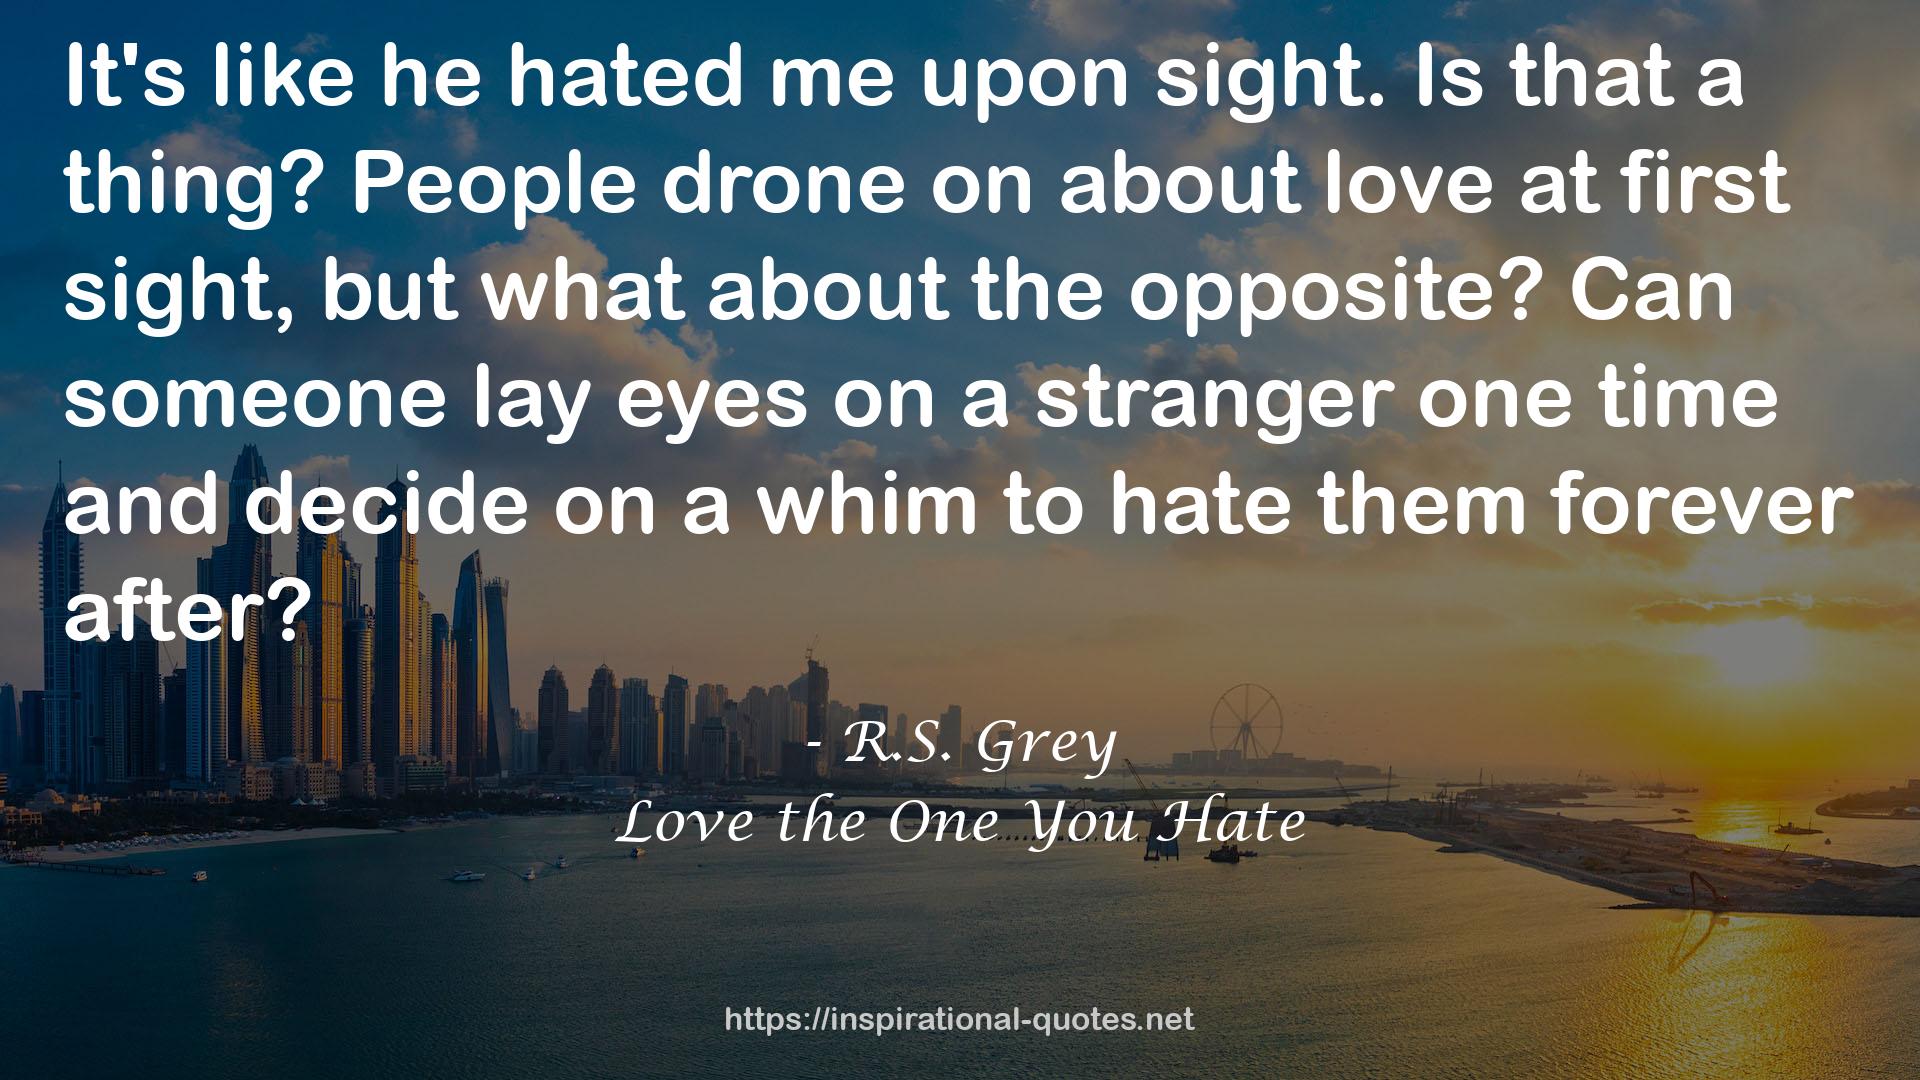 Love the One You Hate QUOTES